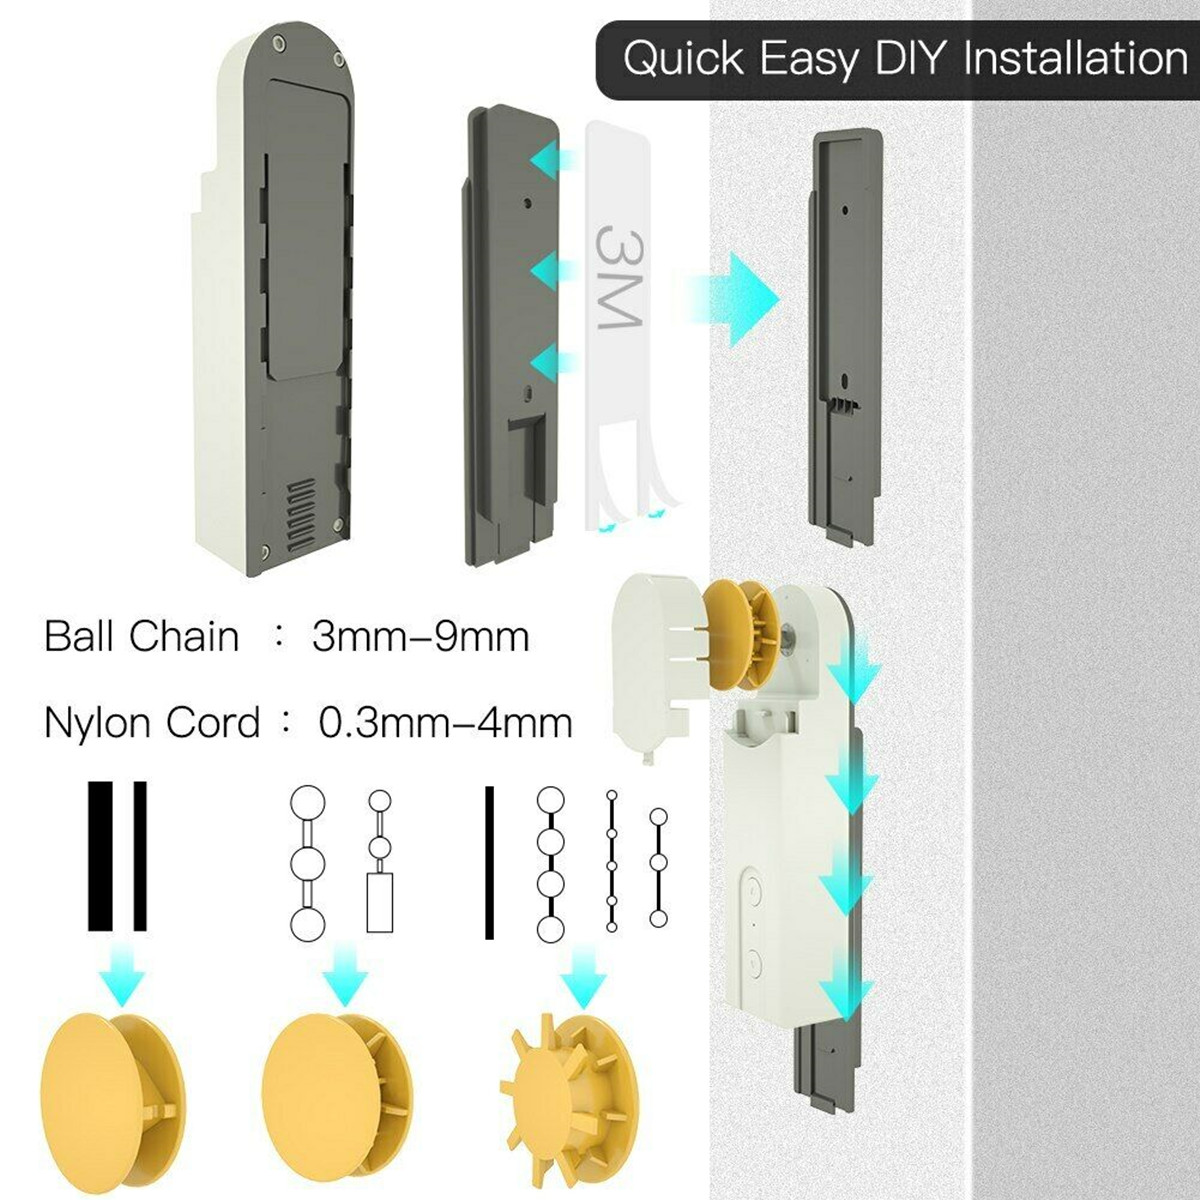 DIY-Smart-Chain-Roller-Blinds-Shade-Shutter-Drive-Motor-Powered-By-APP-Control-Smart-Home-Automation-1621967-6